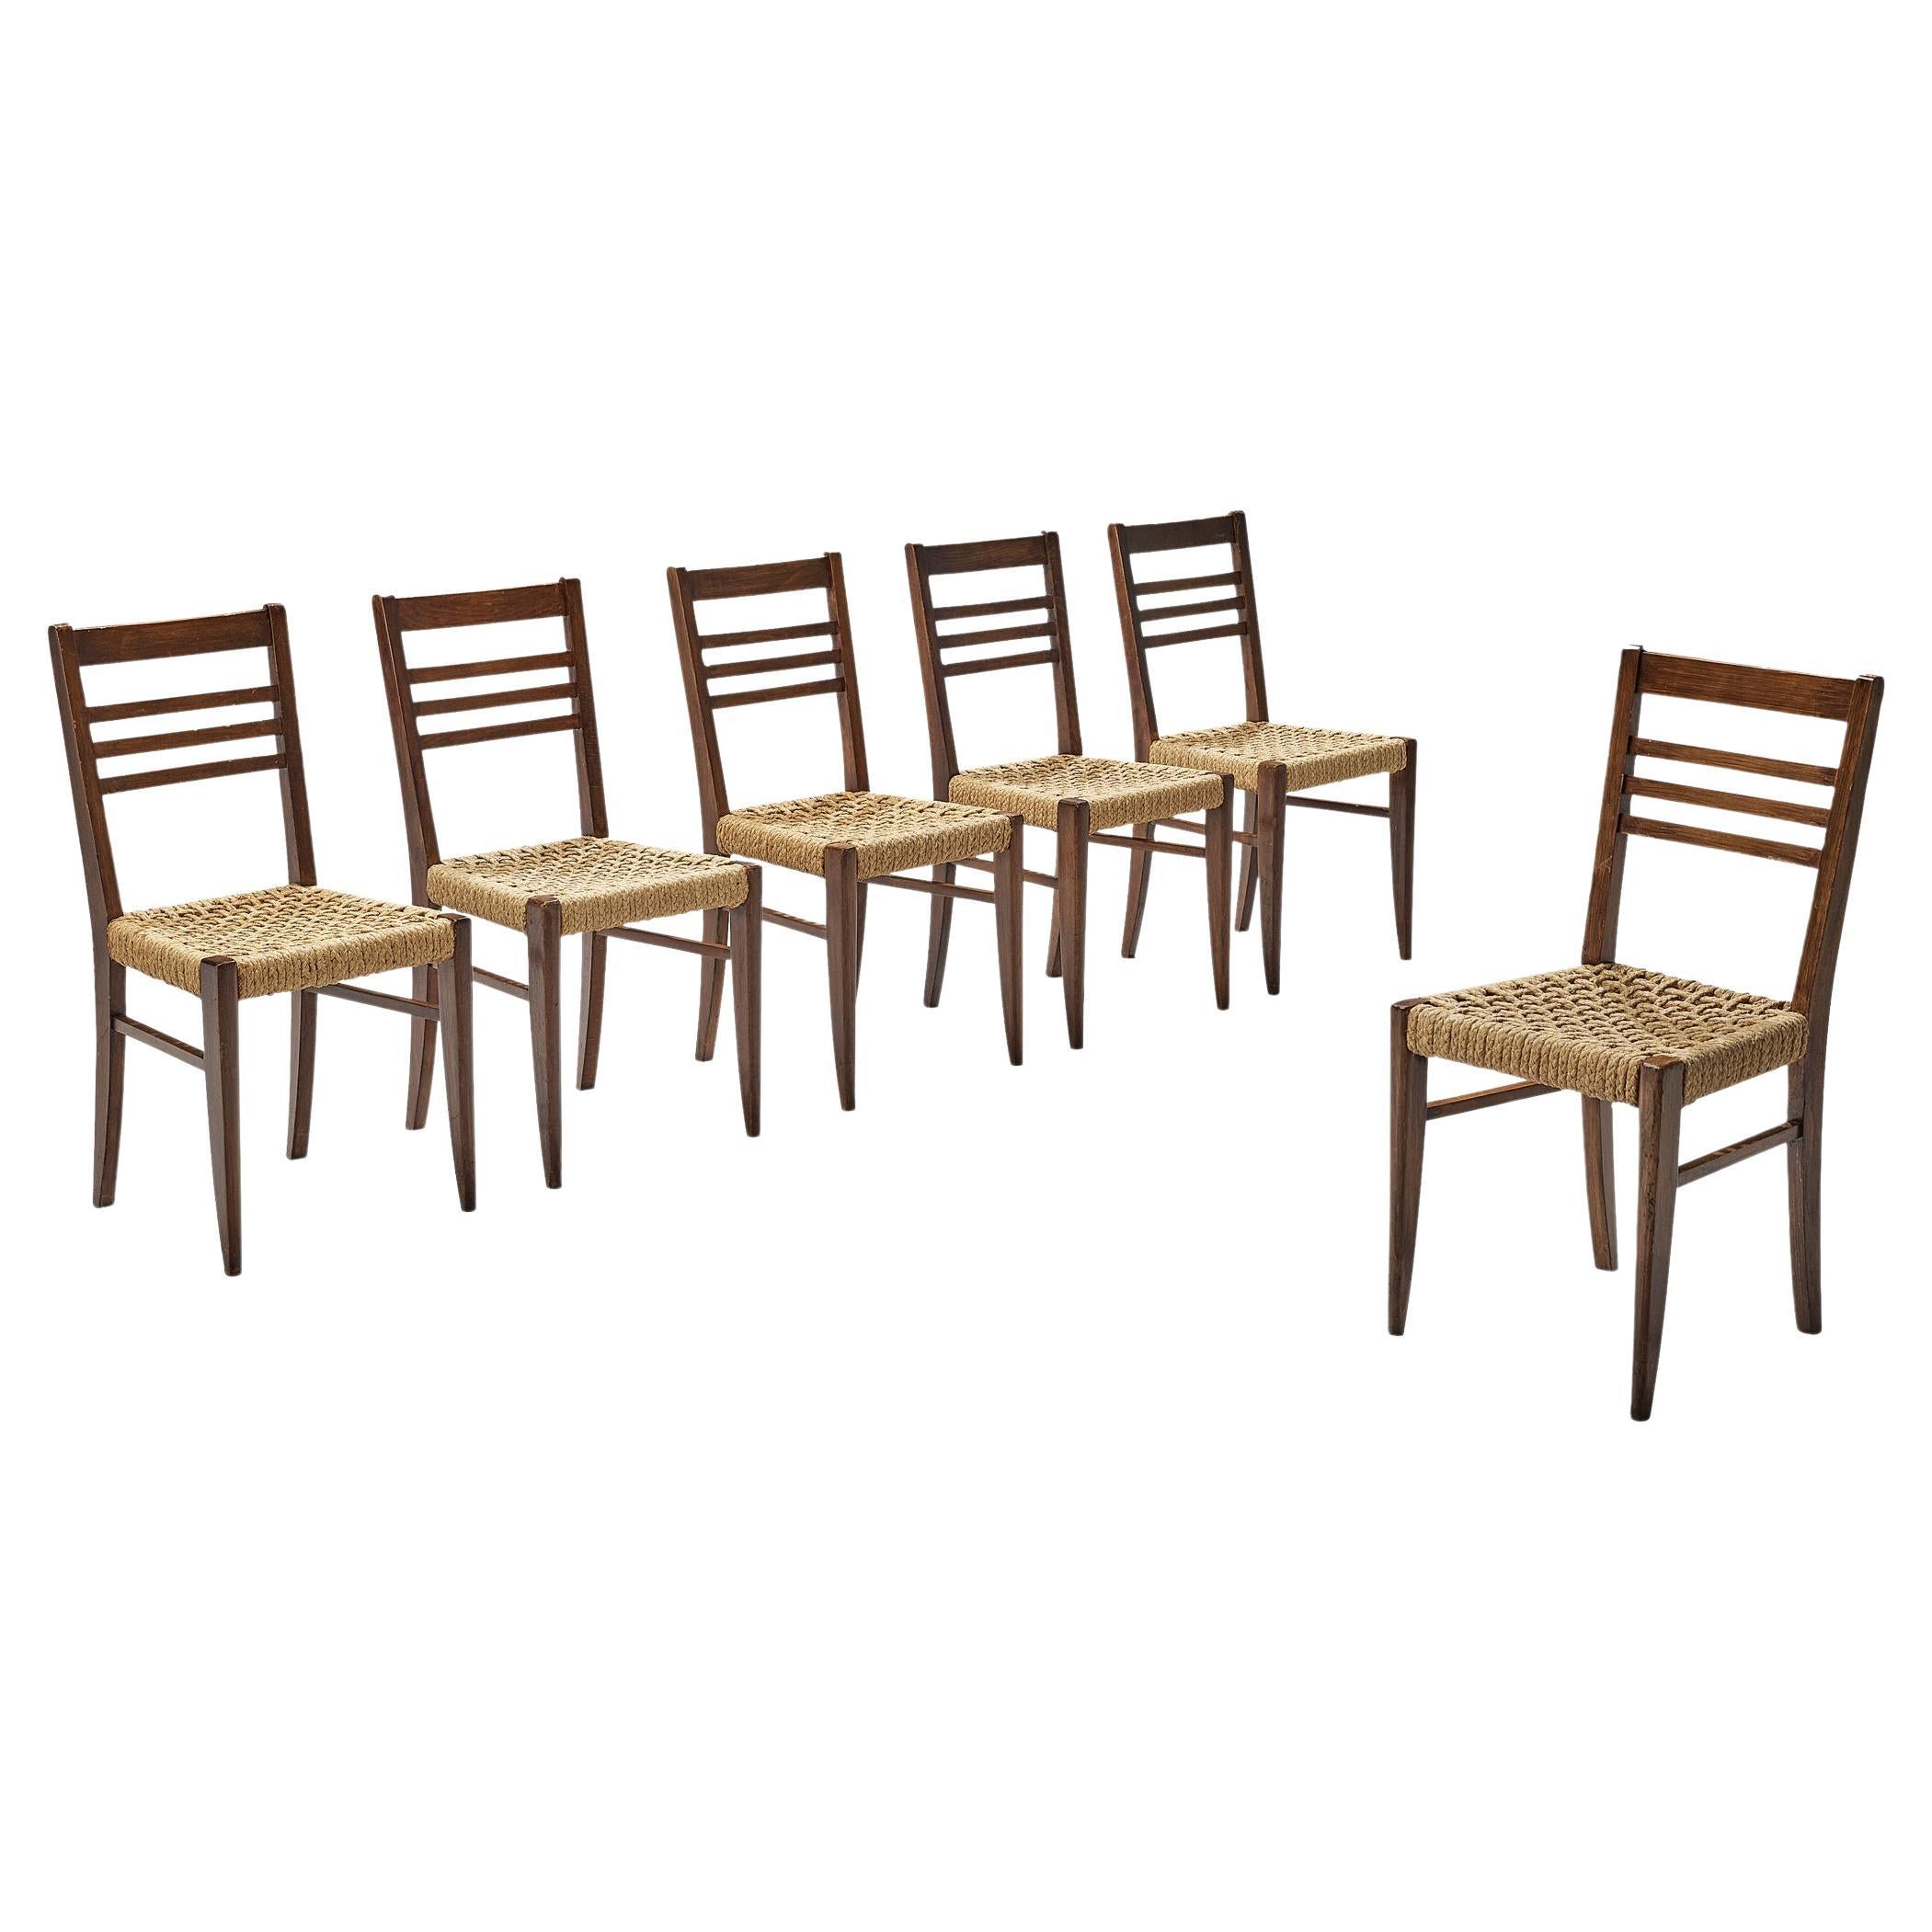 Adrien Audoux & Frida Minet for Vibo Set of Six Dining Chairs in Braided Hemp